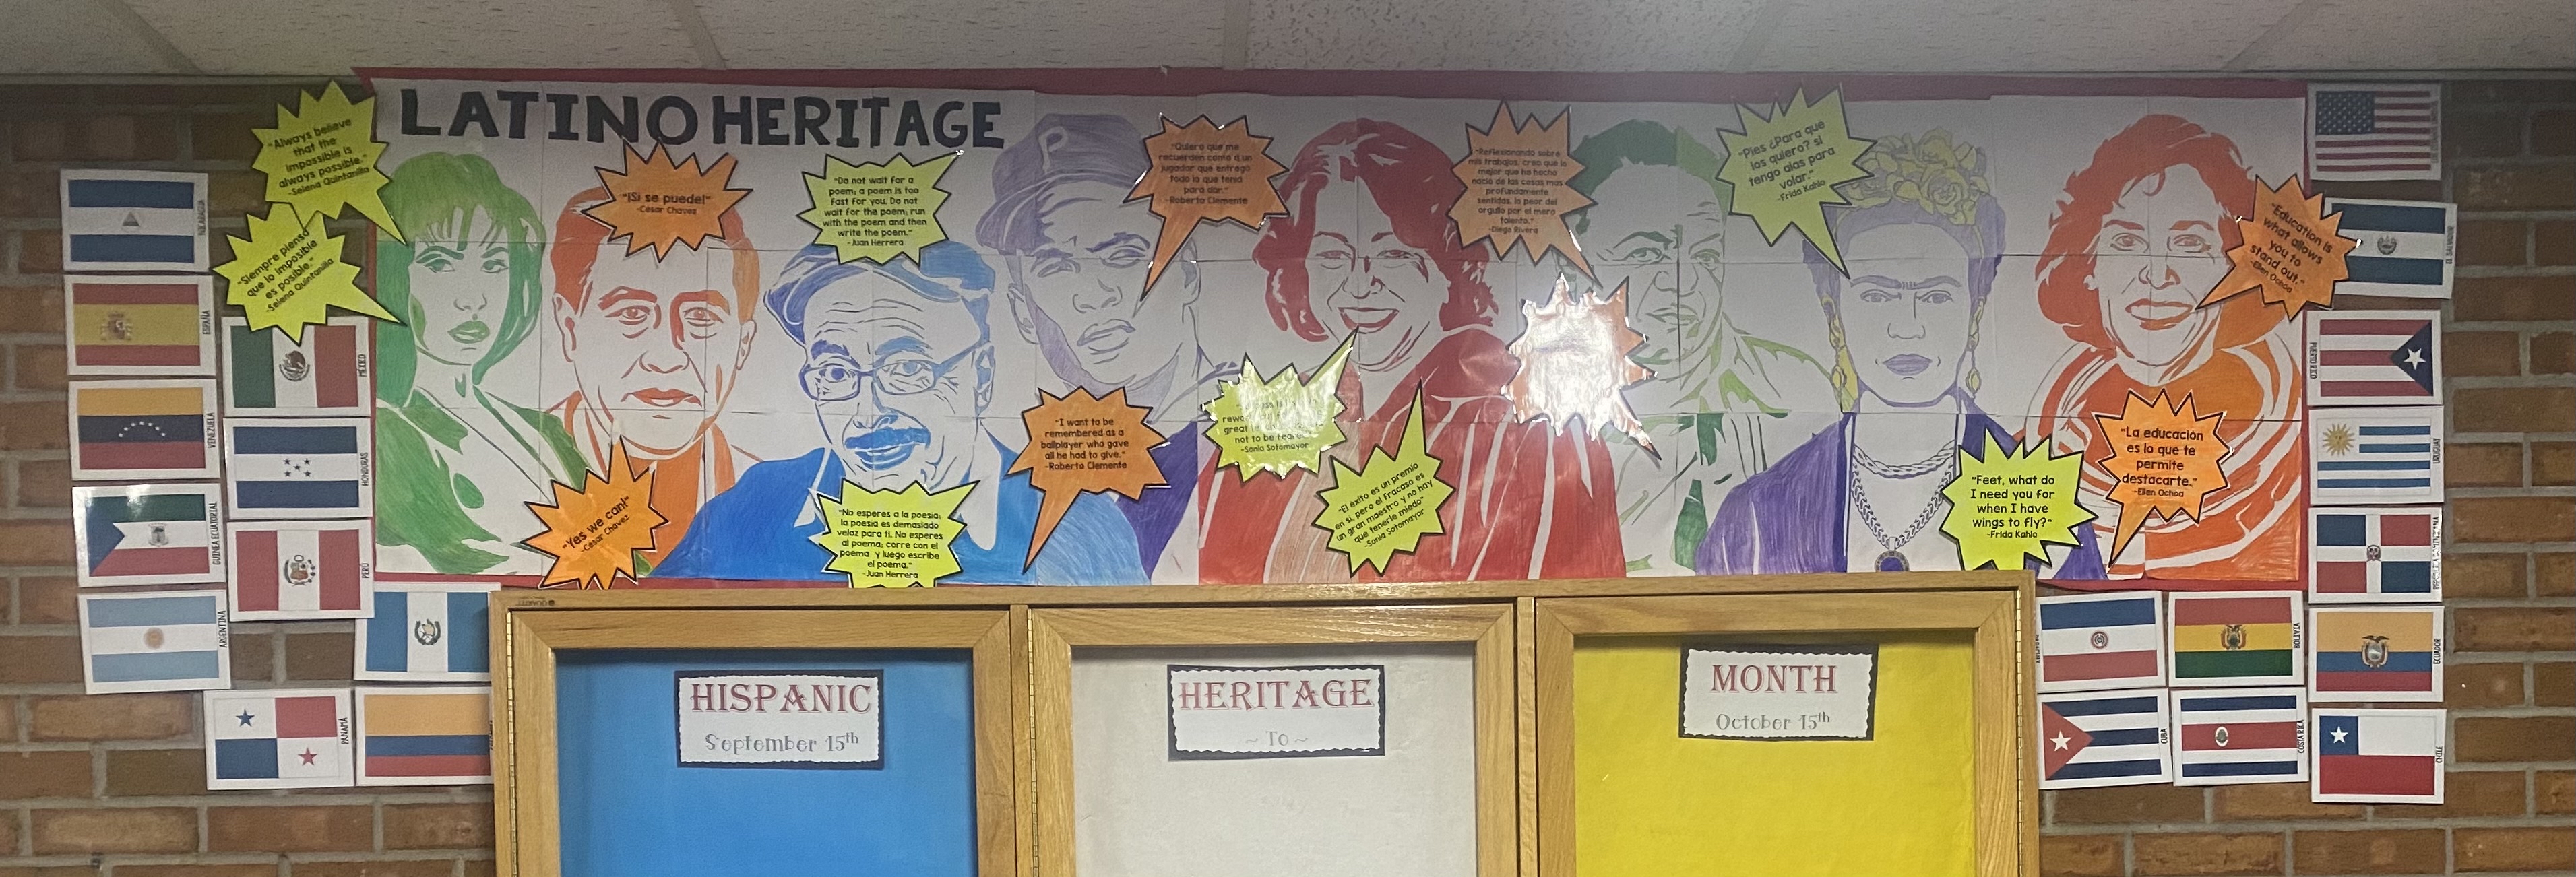 Hispanic Heritage Month banner at Boltz Middle School, featuring famous people and quotes from them.